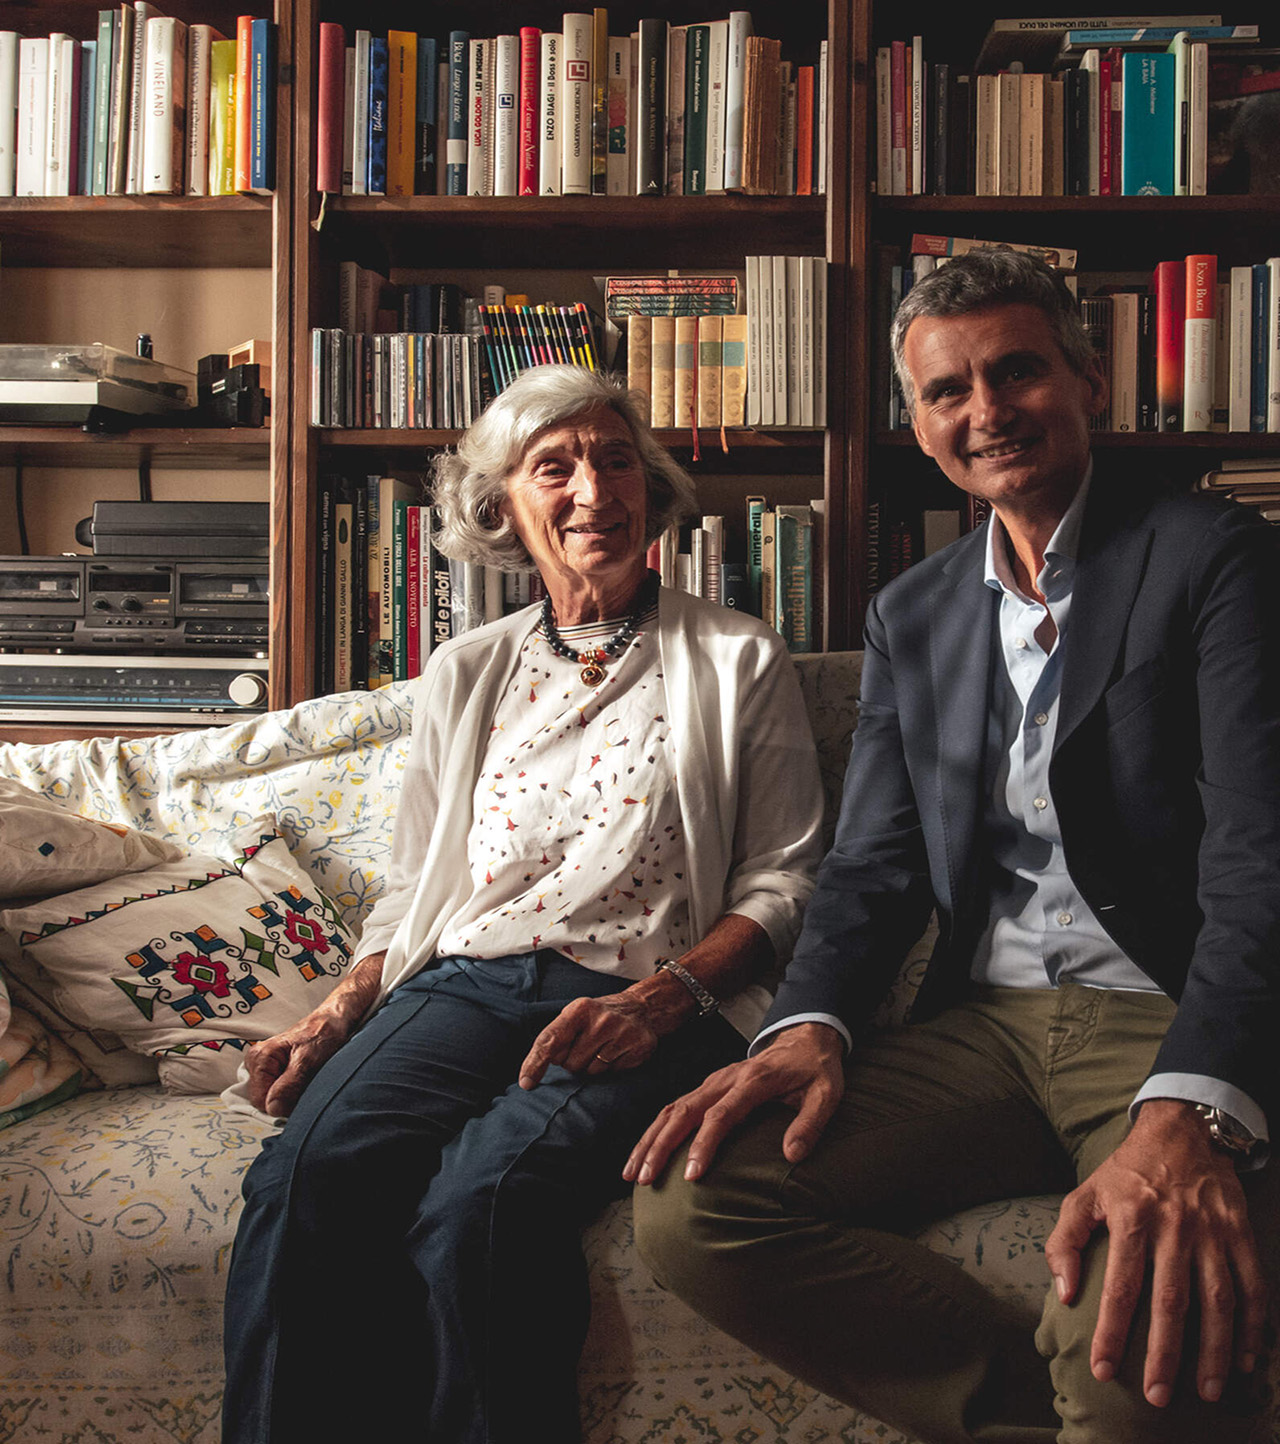 A man and elderly lady sitting on a sofa in front of a bookshelf filled with books.